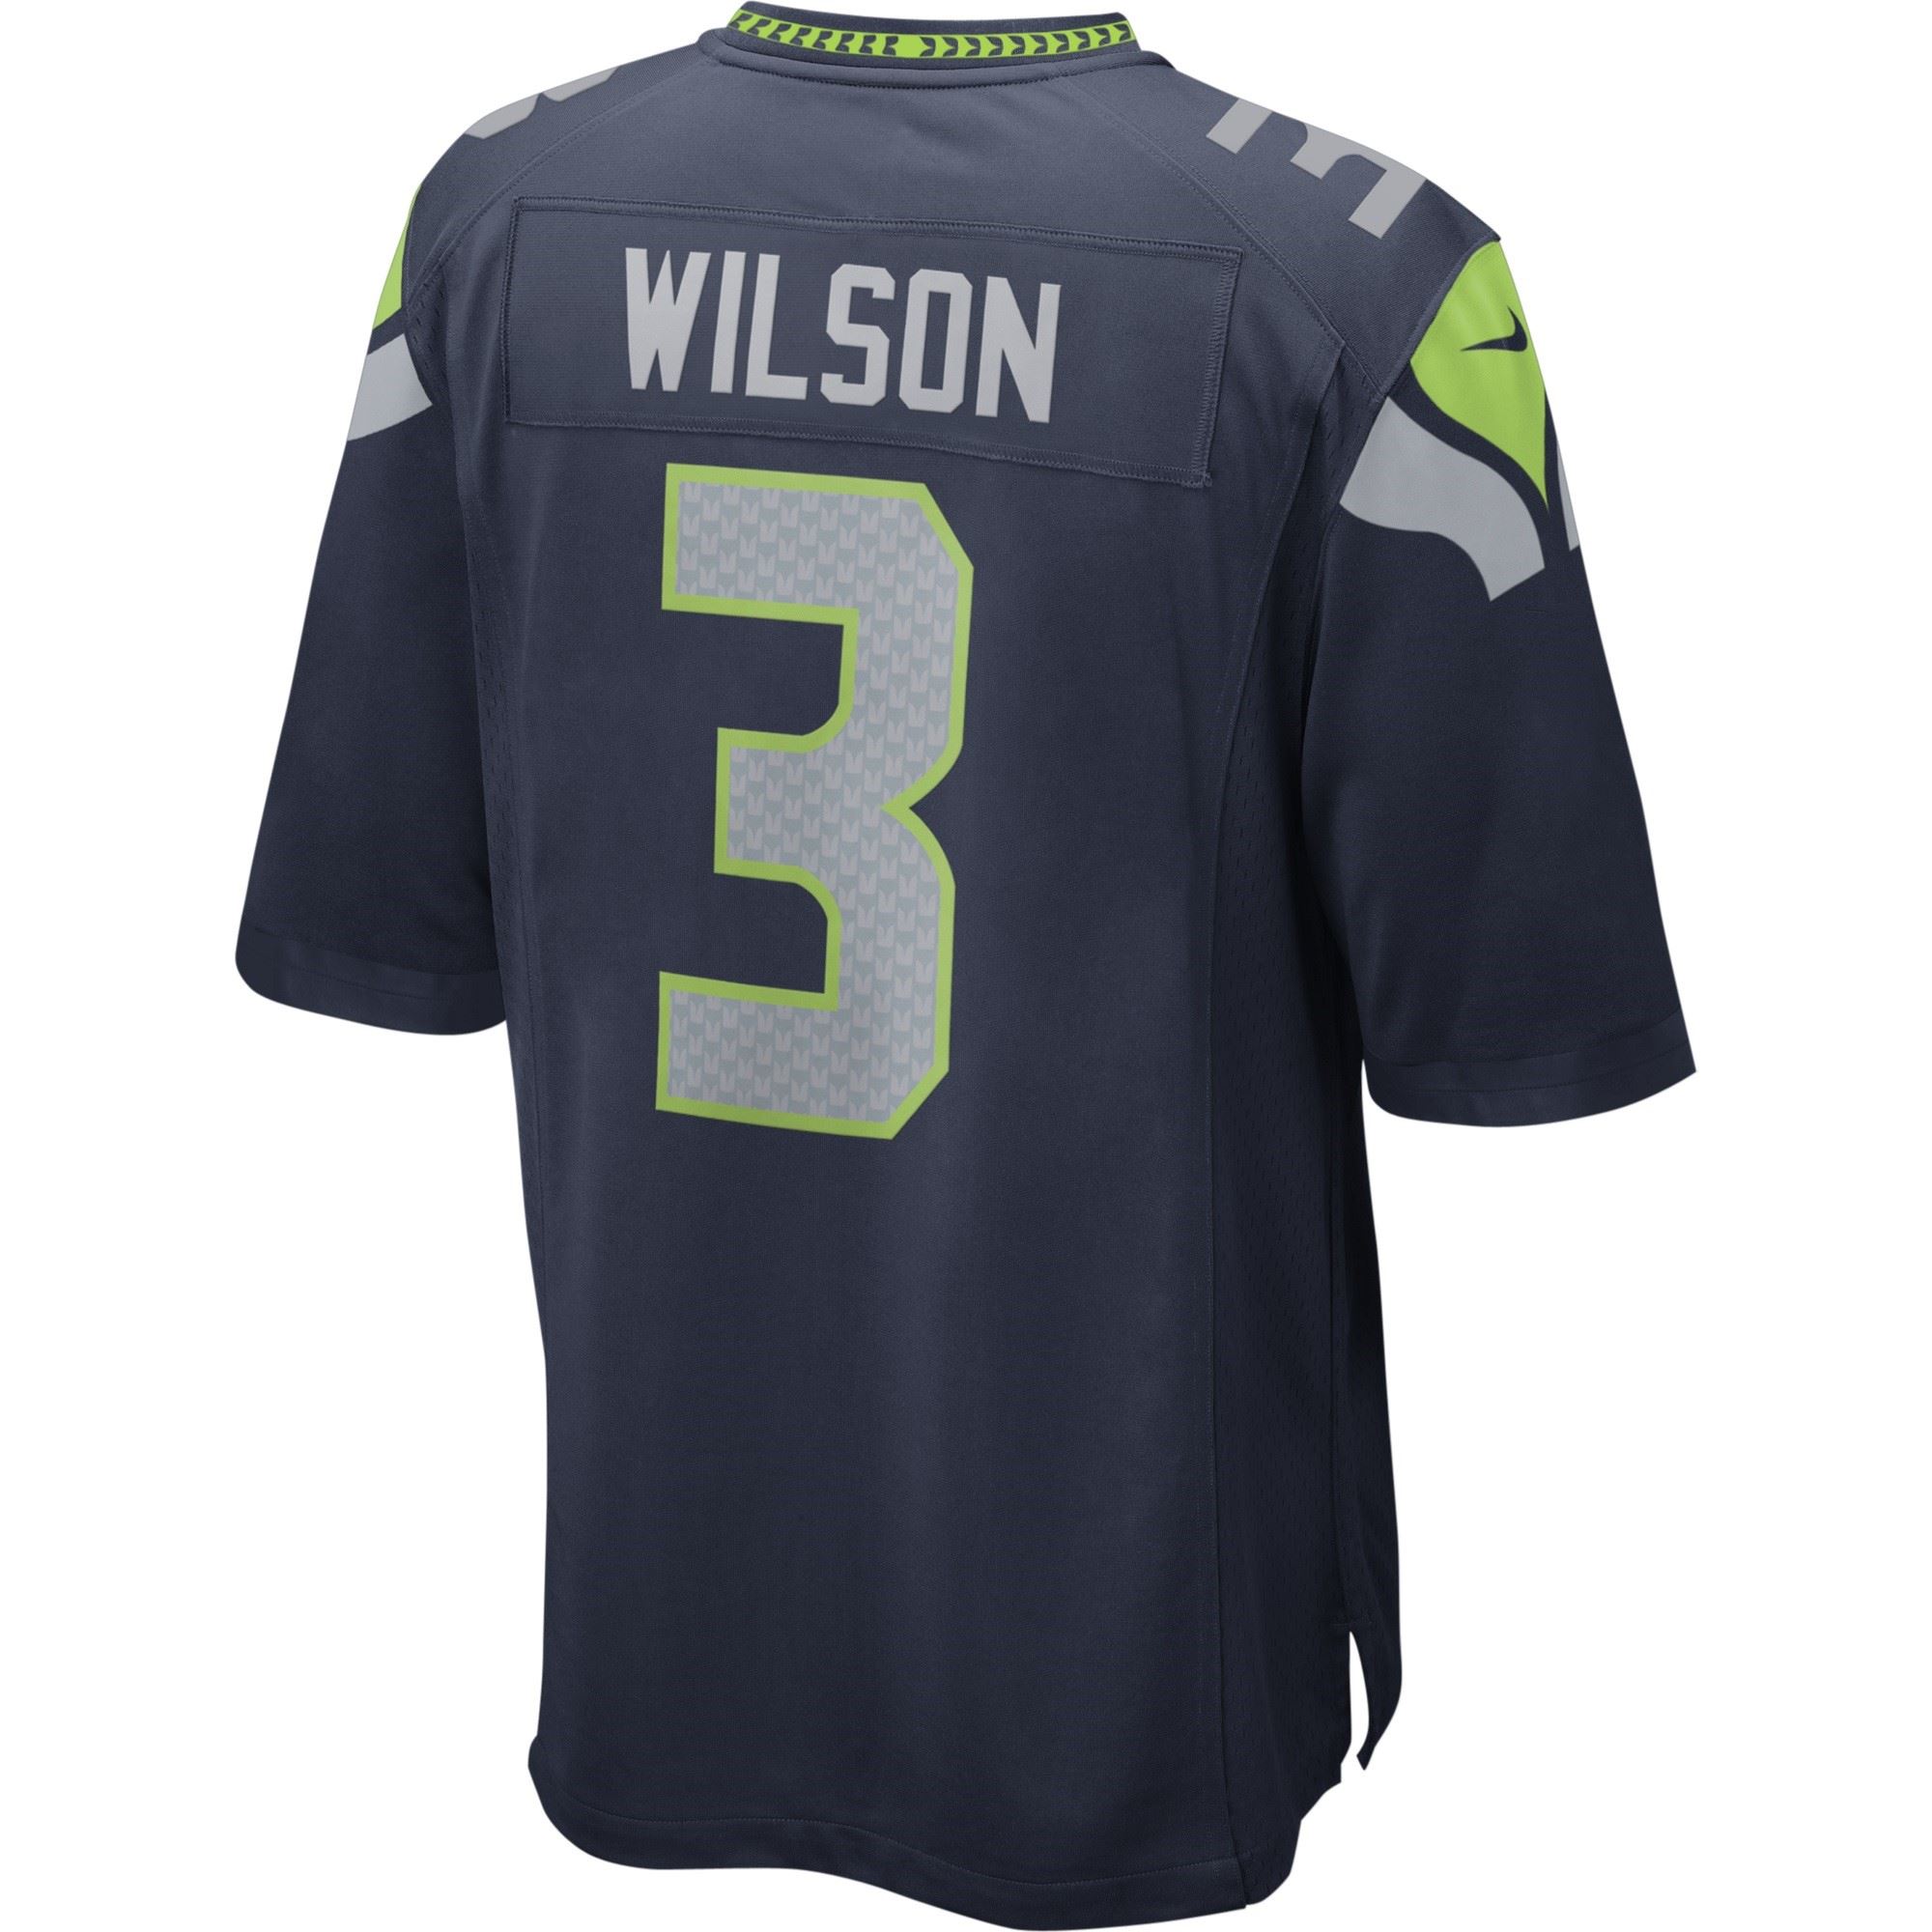 Russell Wilson #3 Seattle Seahawks NFL Game Team Colour Jersey Nike